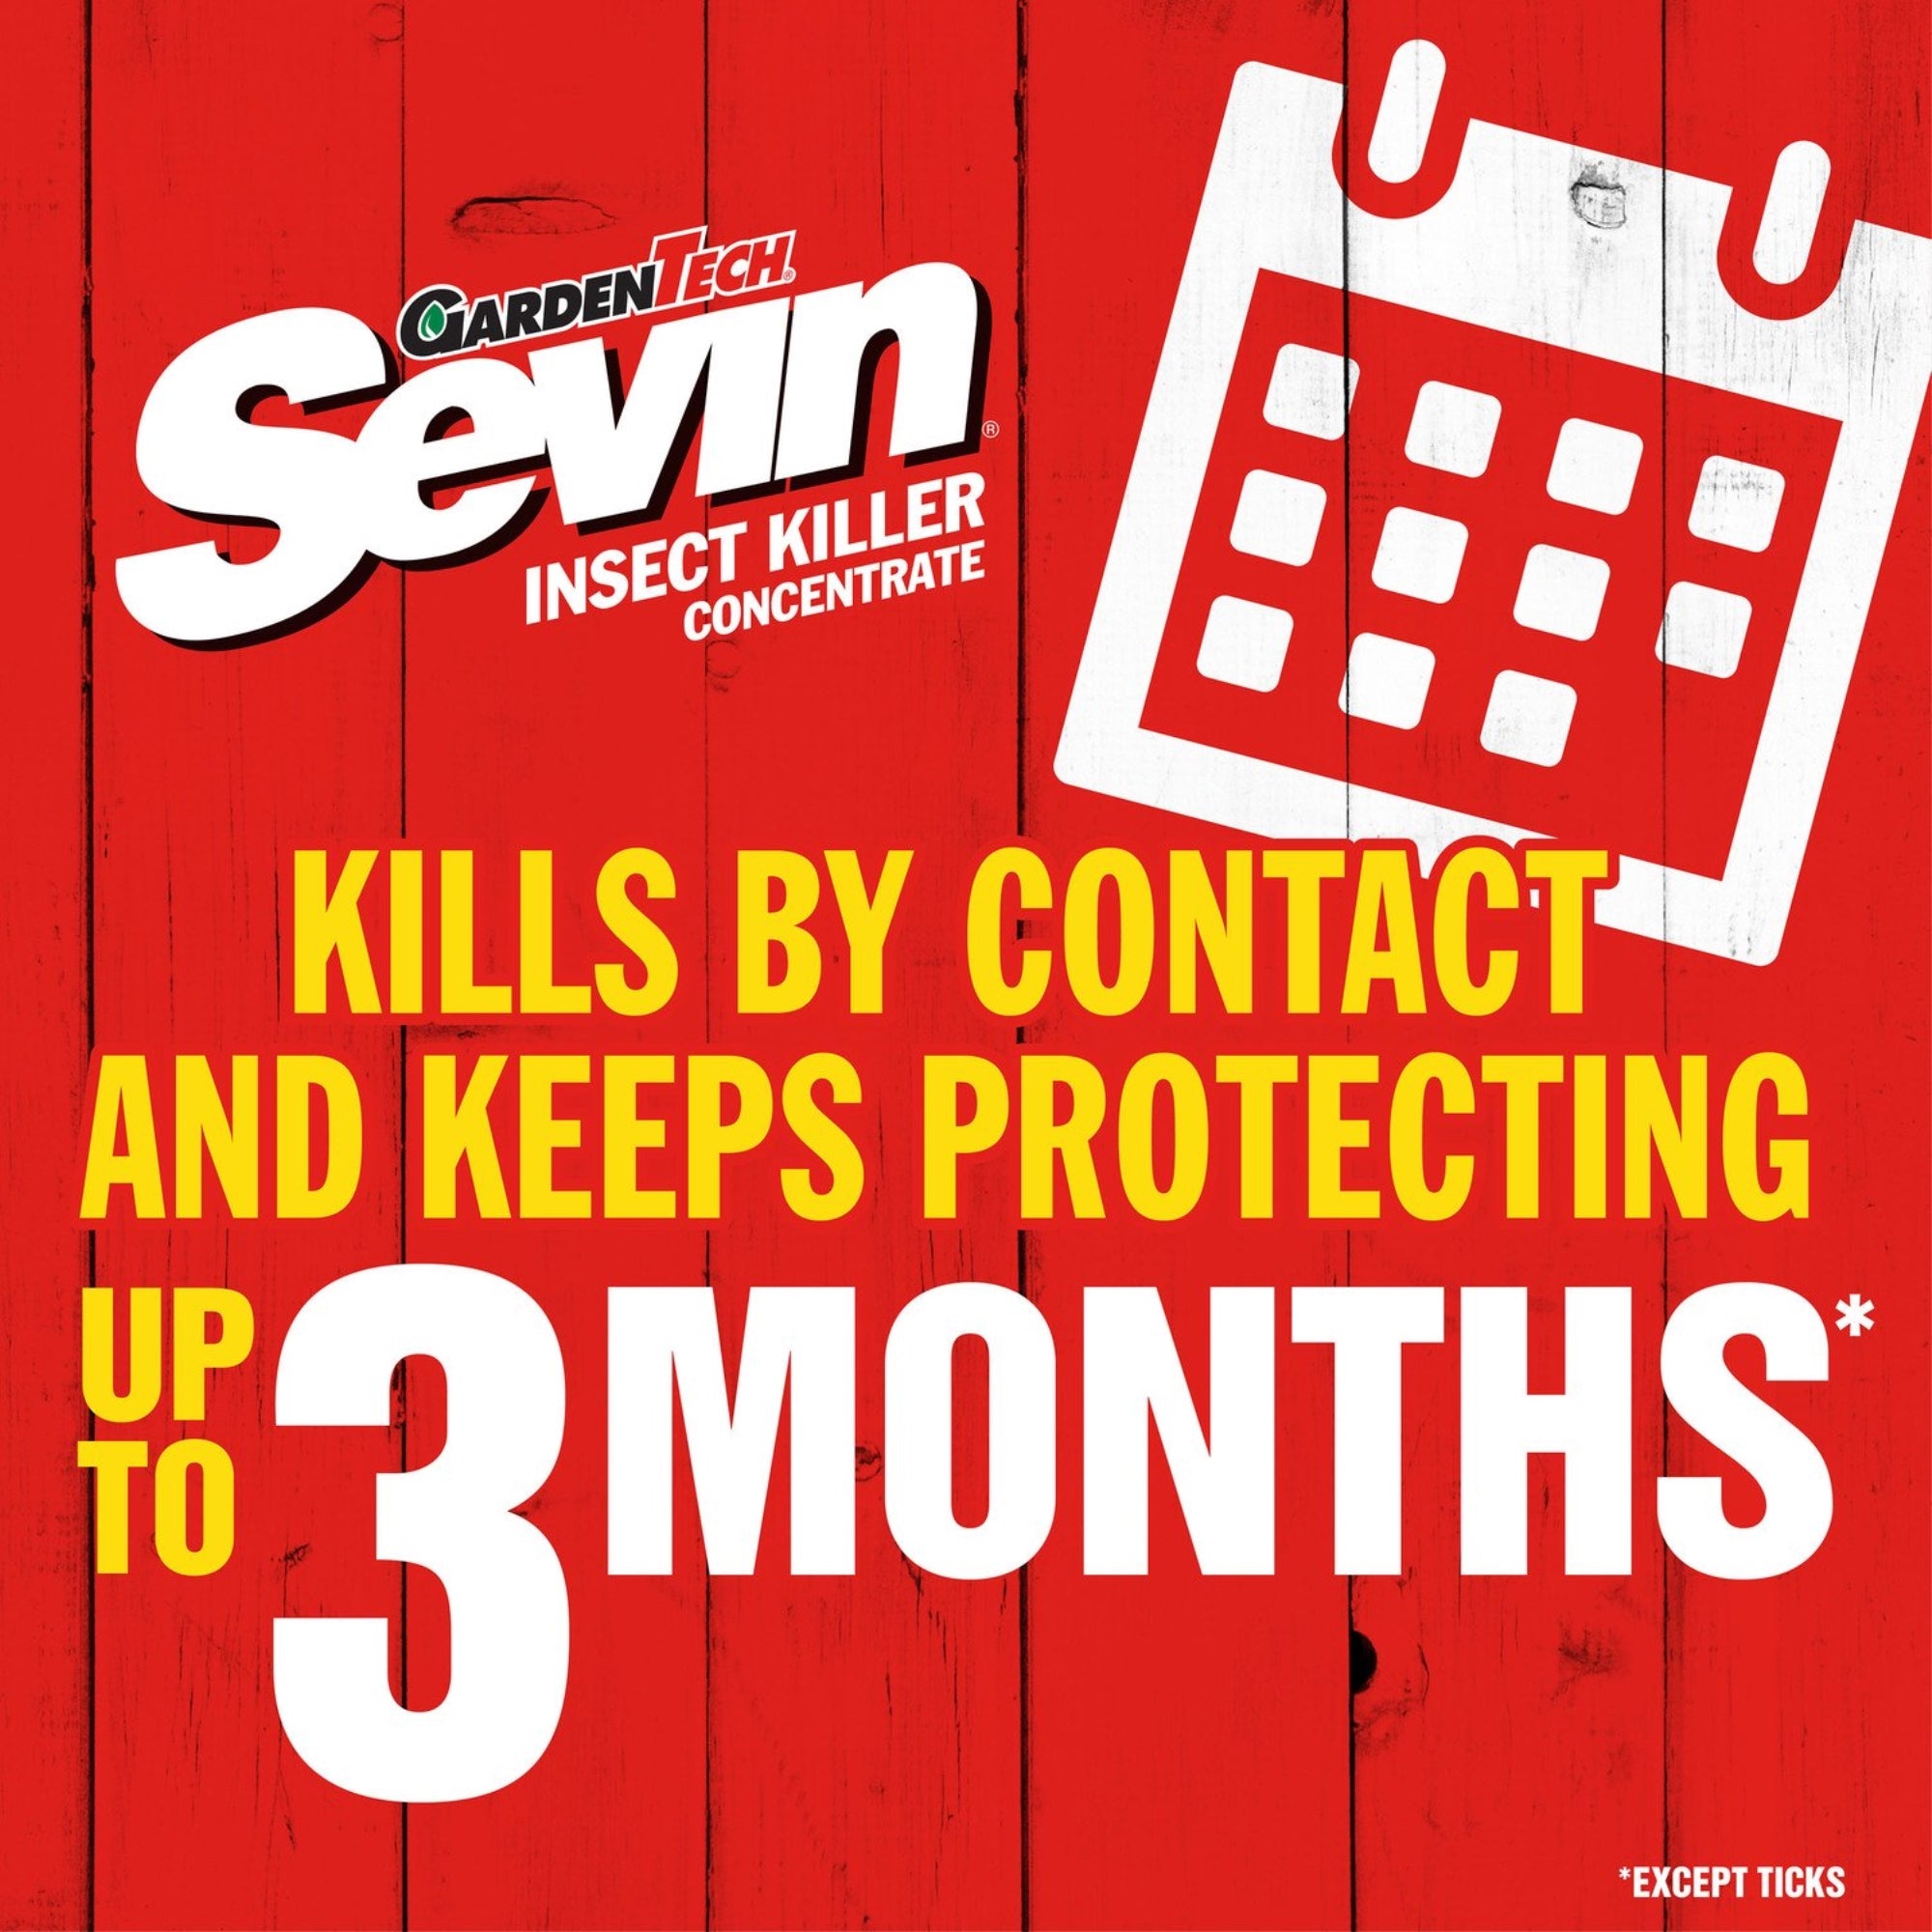 Sevin Insect Killer Concentrate, 32 oz